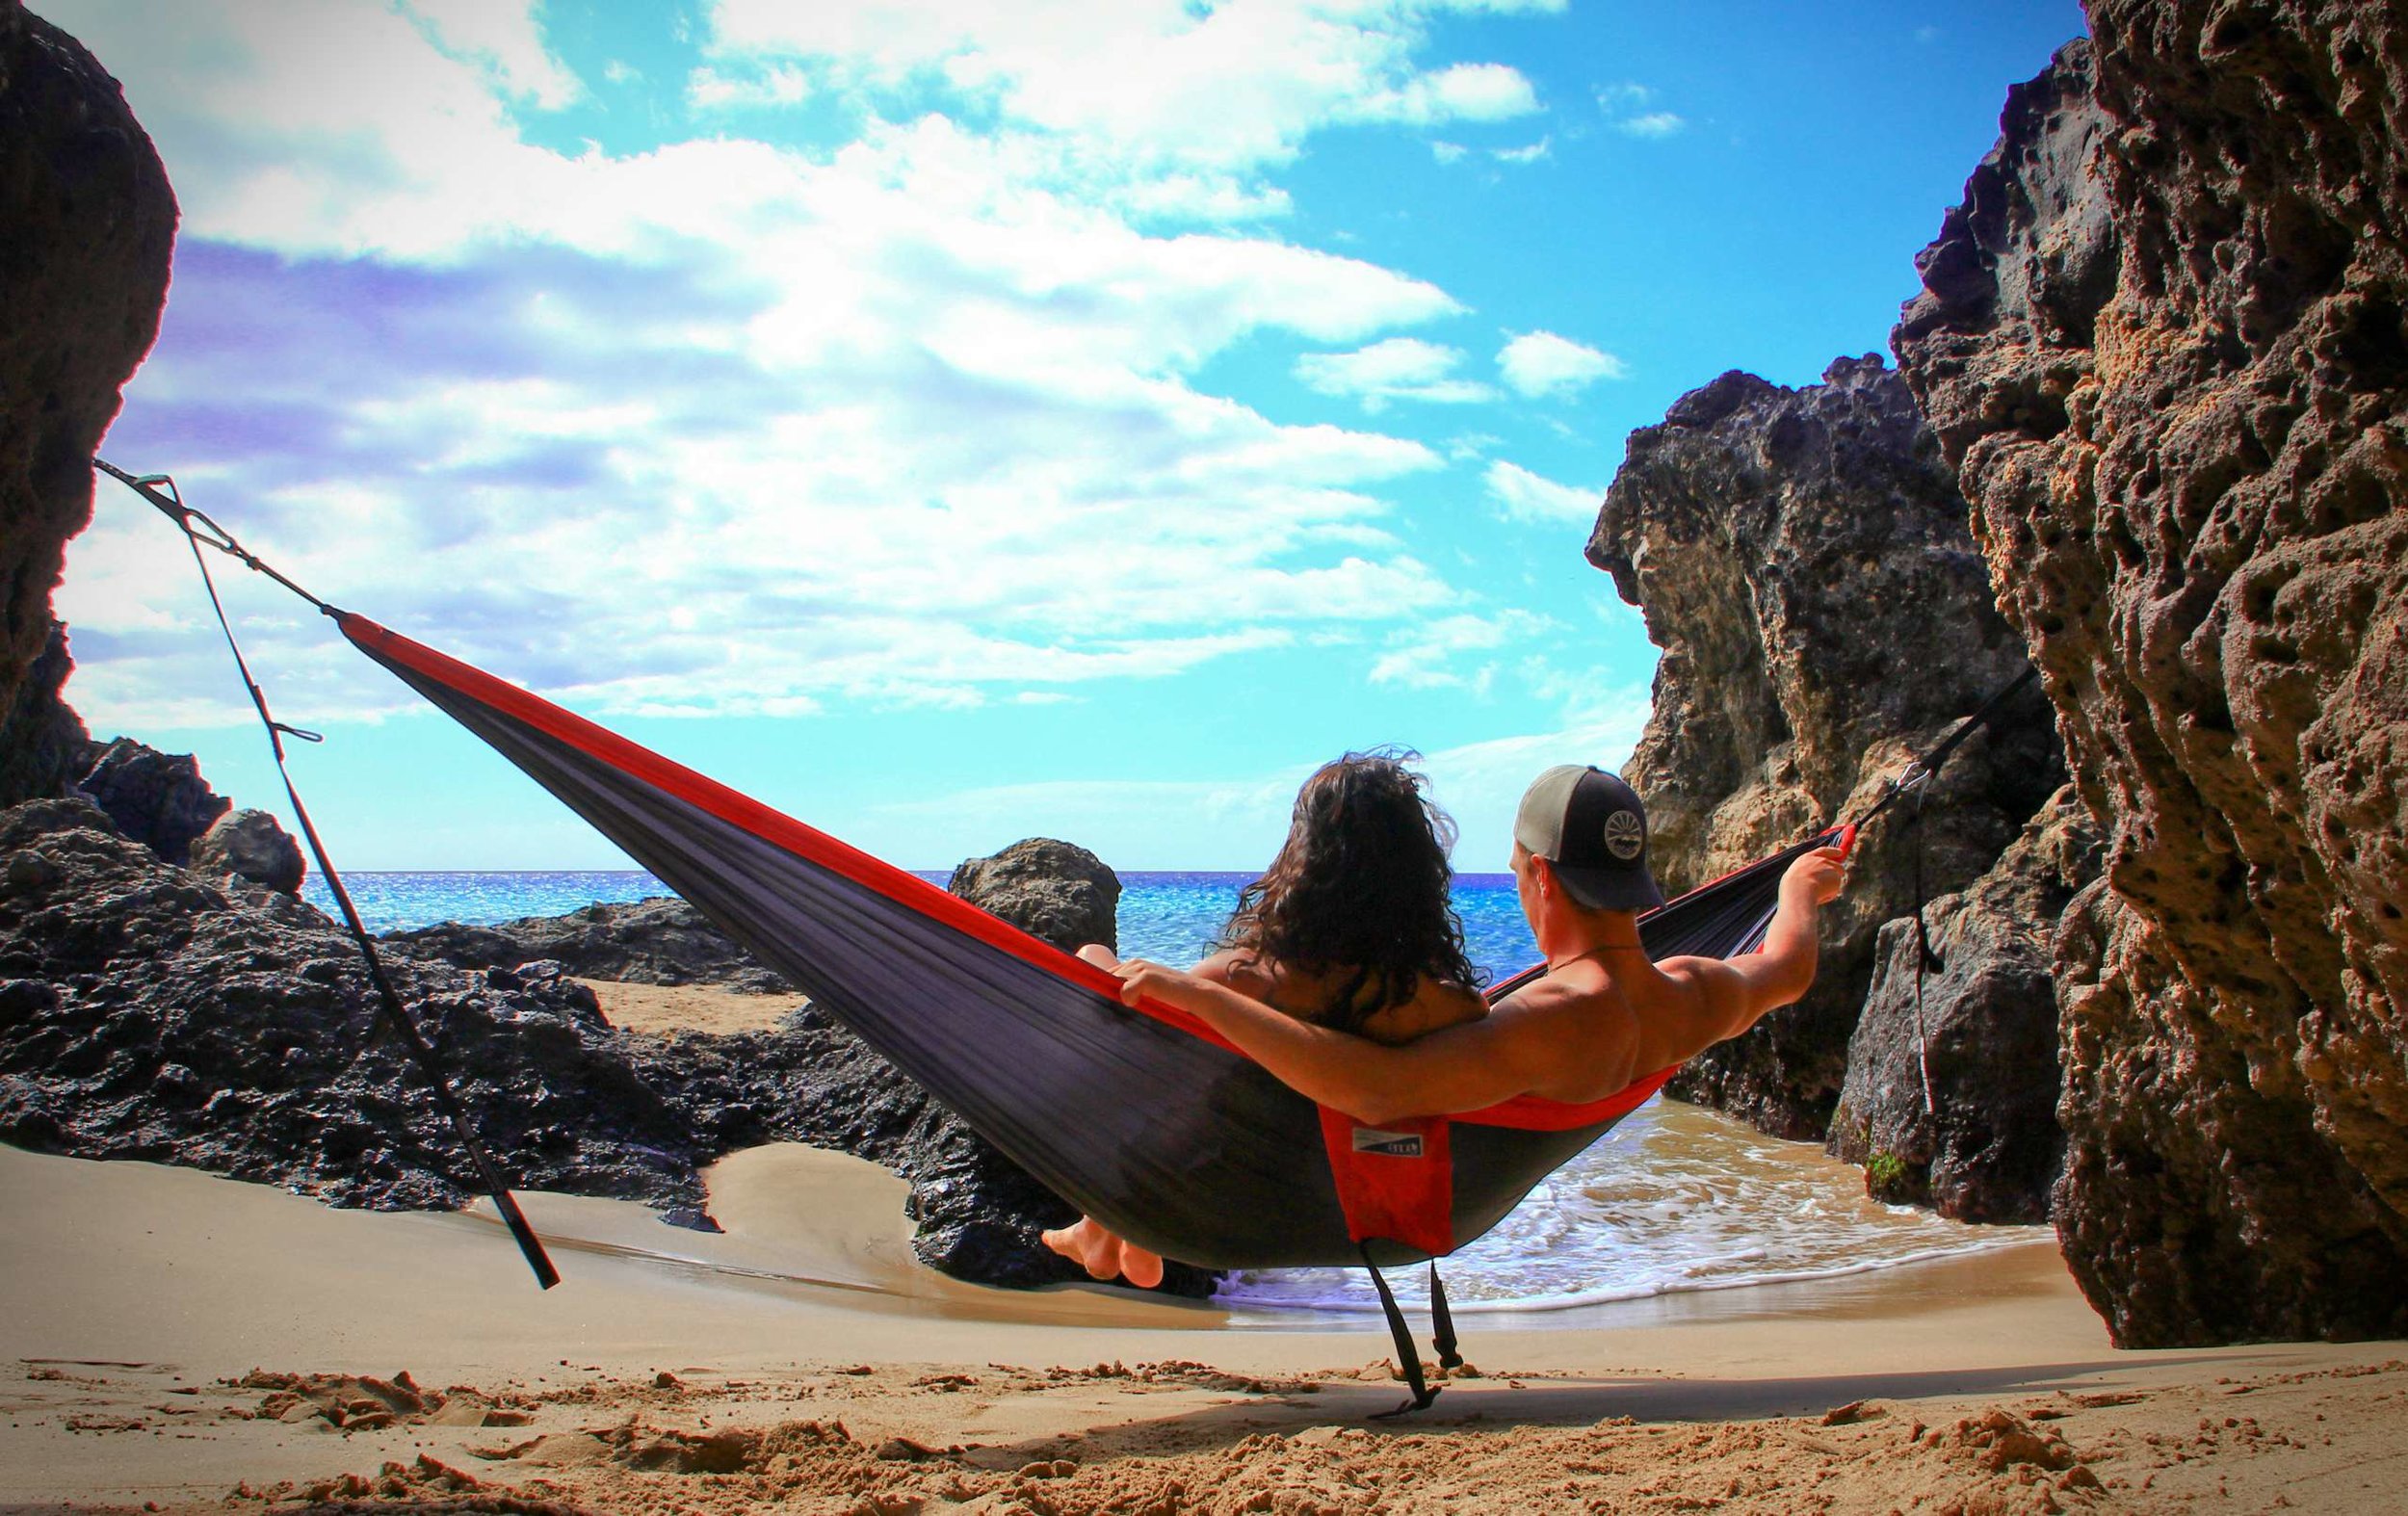 Portable Hammock for Two ENO Eagles Nest Outfitters DoubleNest Hammock Red/Charcoal 